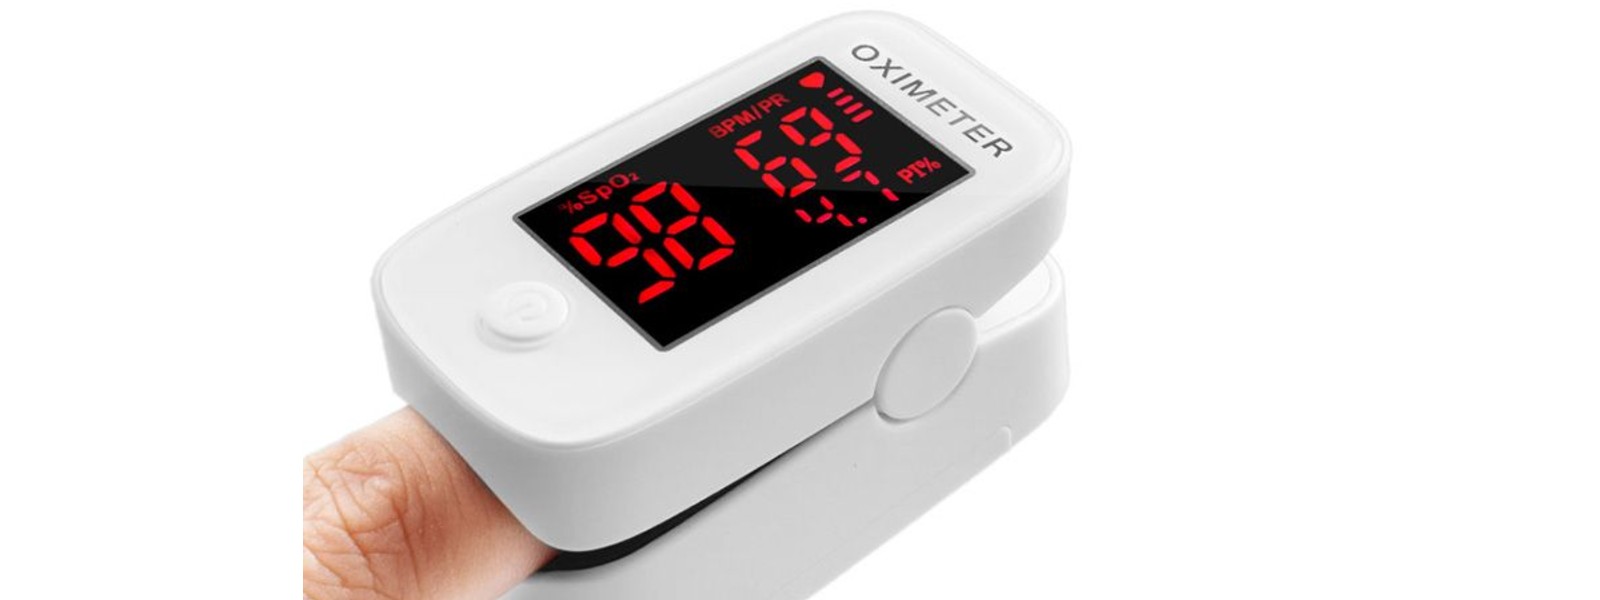 Rs. 3000/- MRP for Pulse Oximeters